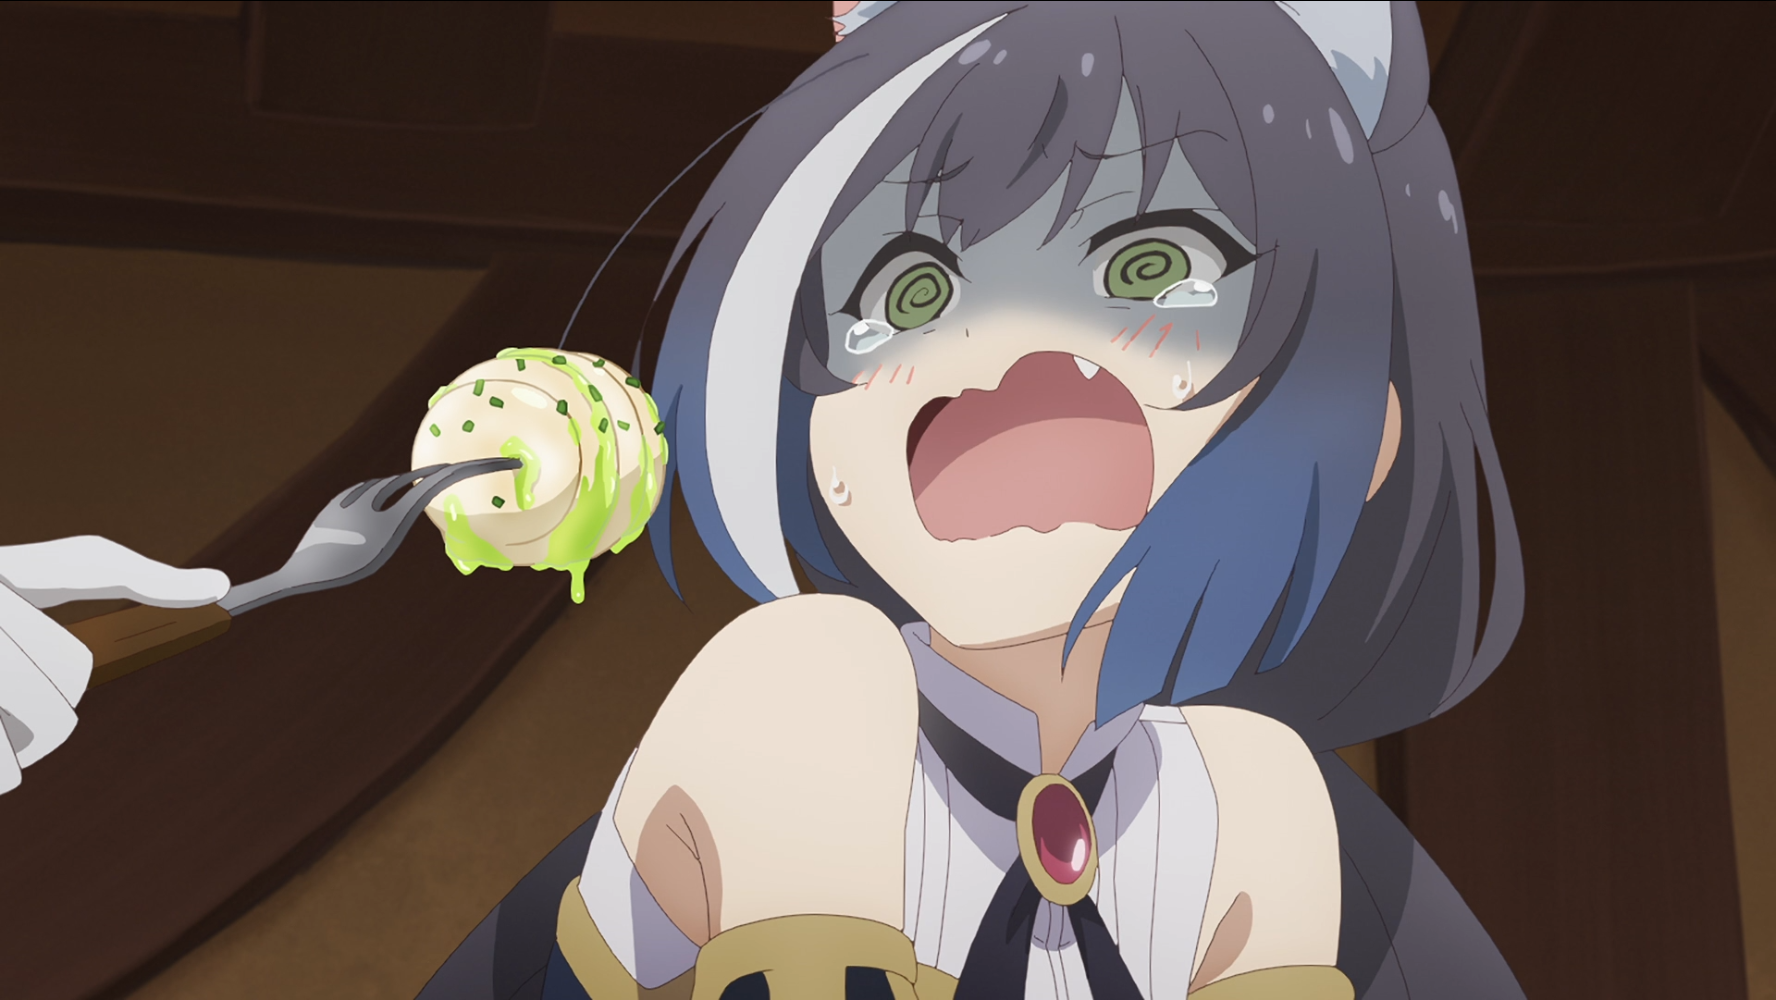 Pecorine attempts to feed a distressed Karyl an insect-based meal in a scene from the Princess Connect! Re:Dive TV anime.